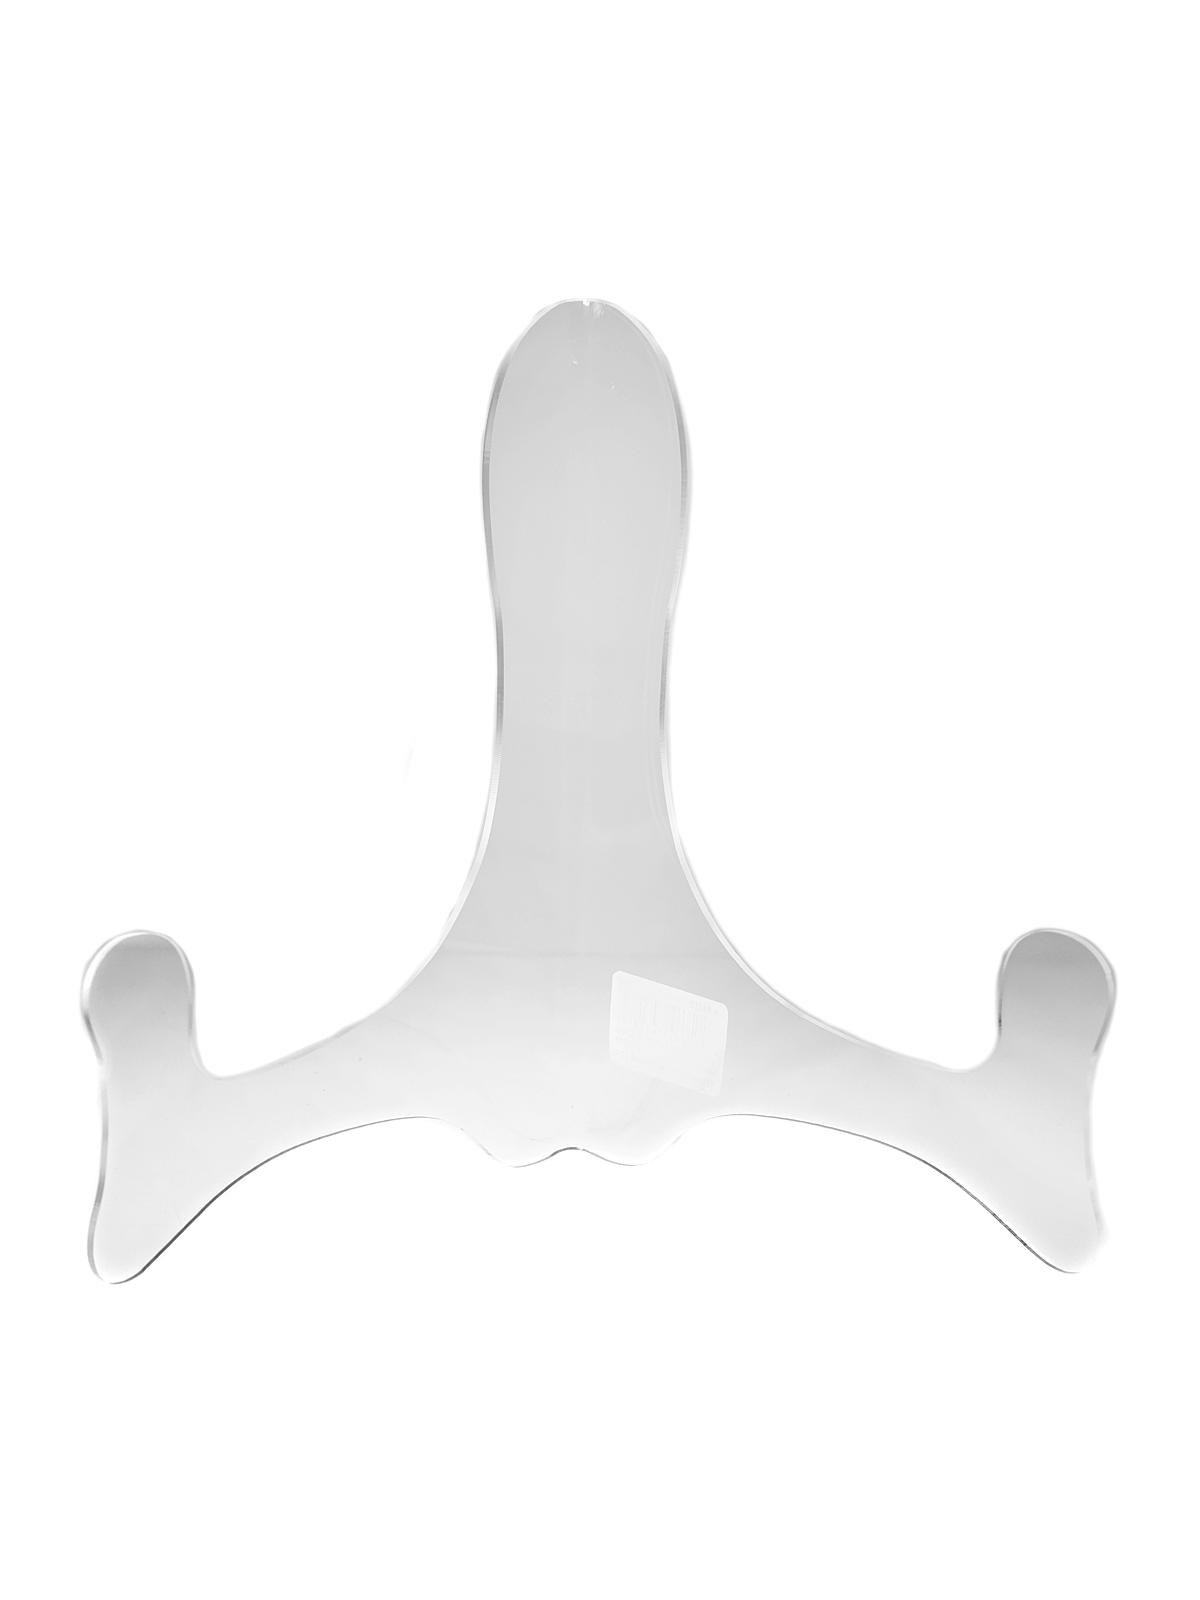 Classic Clear Acrylic Hingeless Plate Stands 8 3 4 In. Each